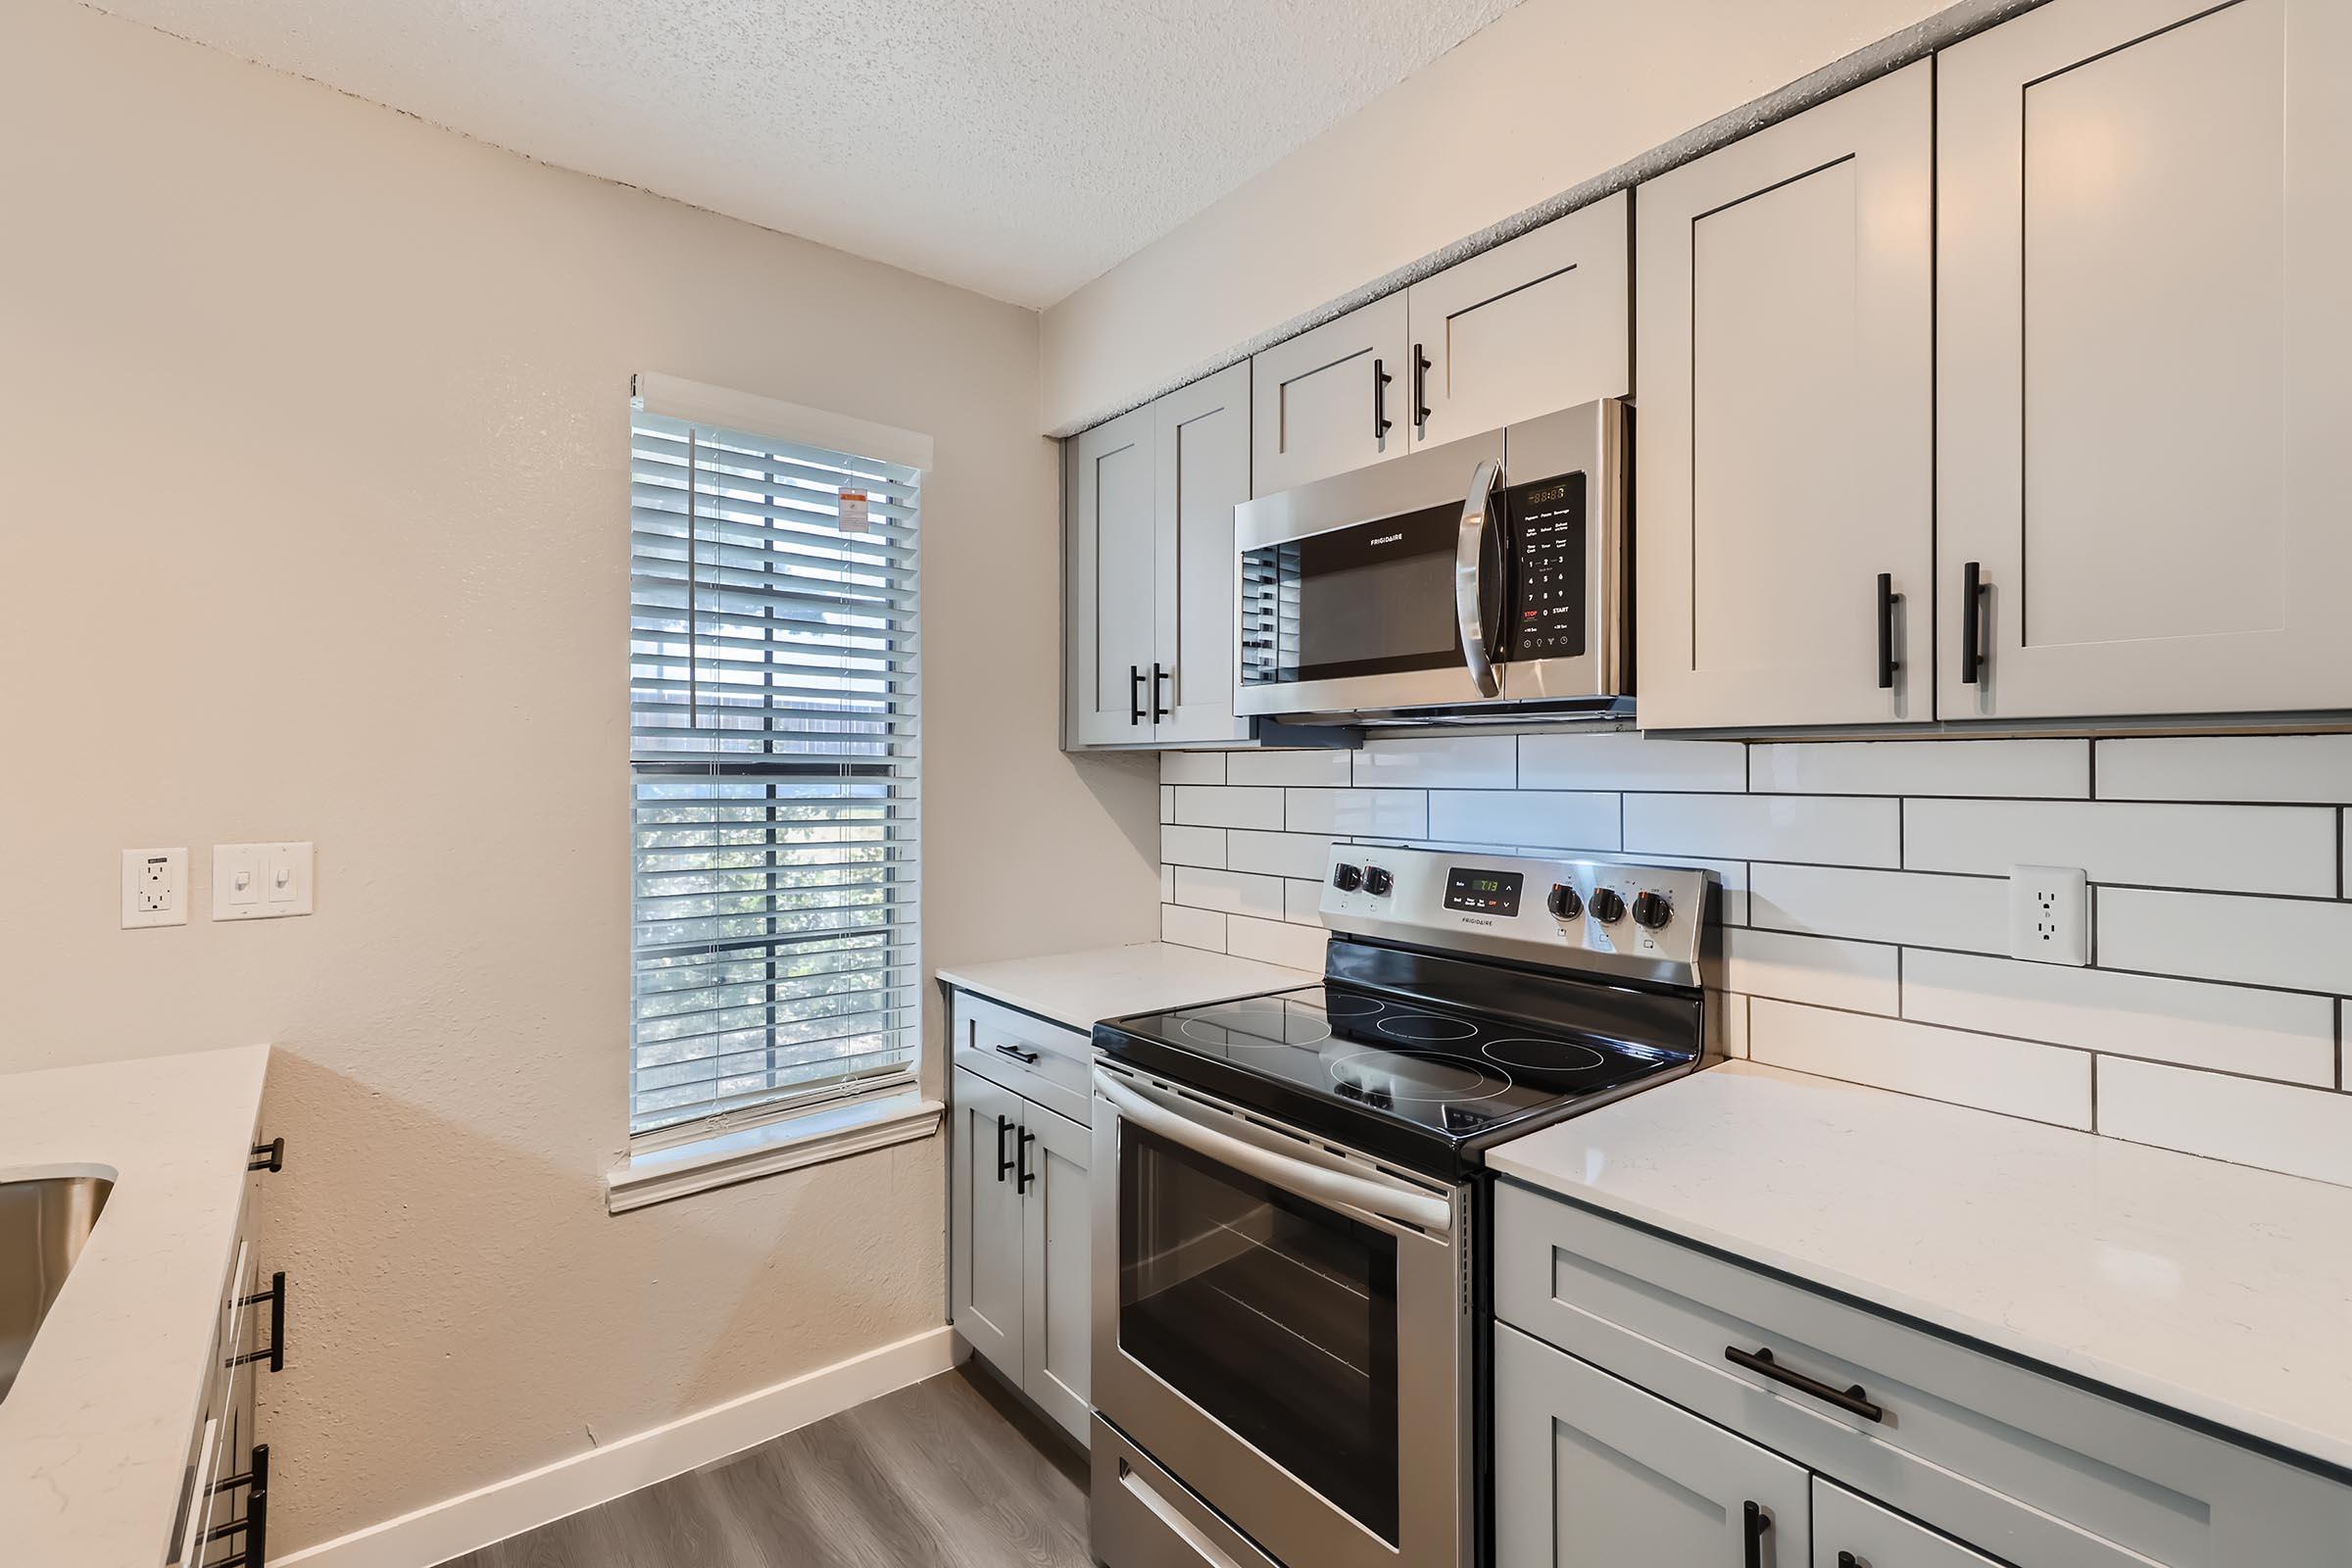 An apartment kitchen with grey shaker cabinets and a window at Rise Oak Creek.